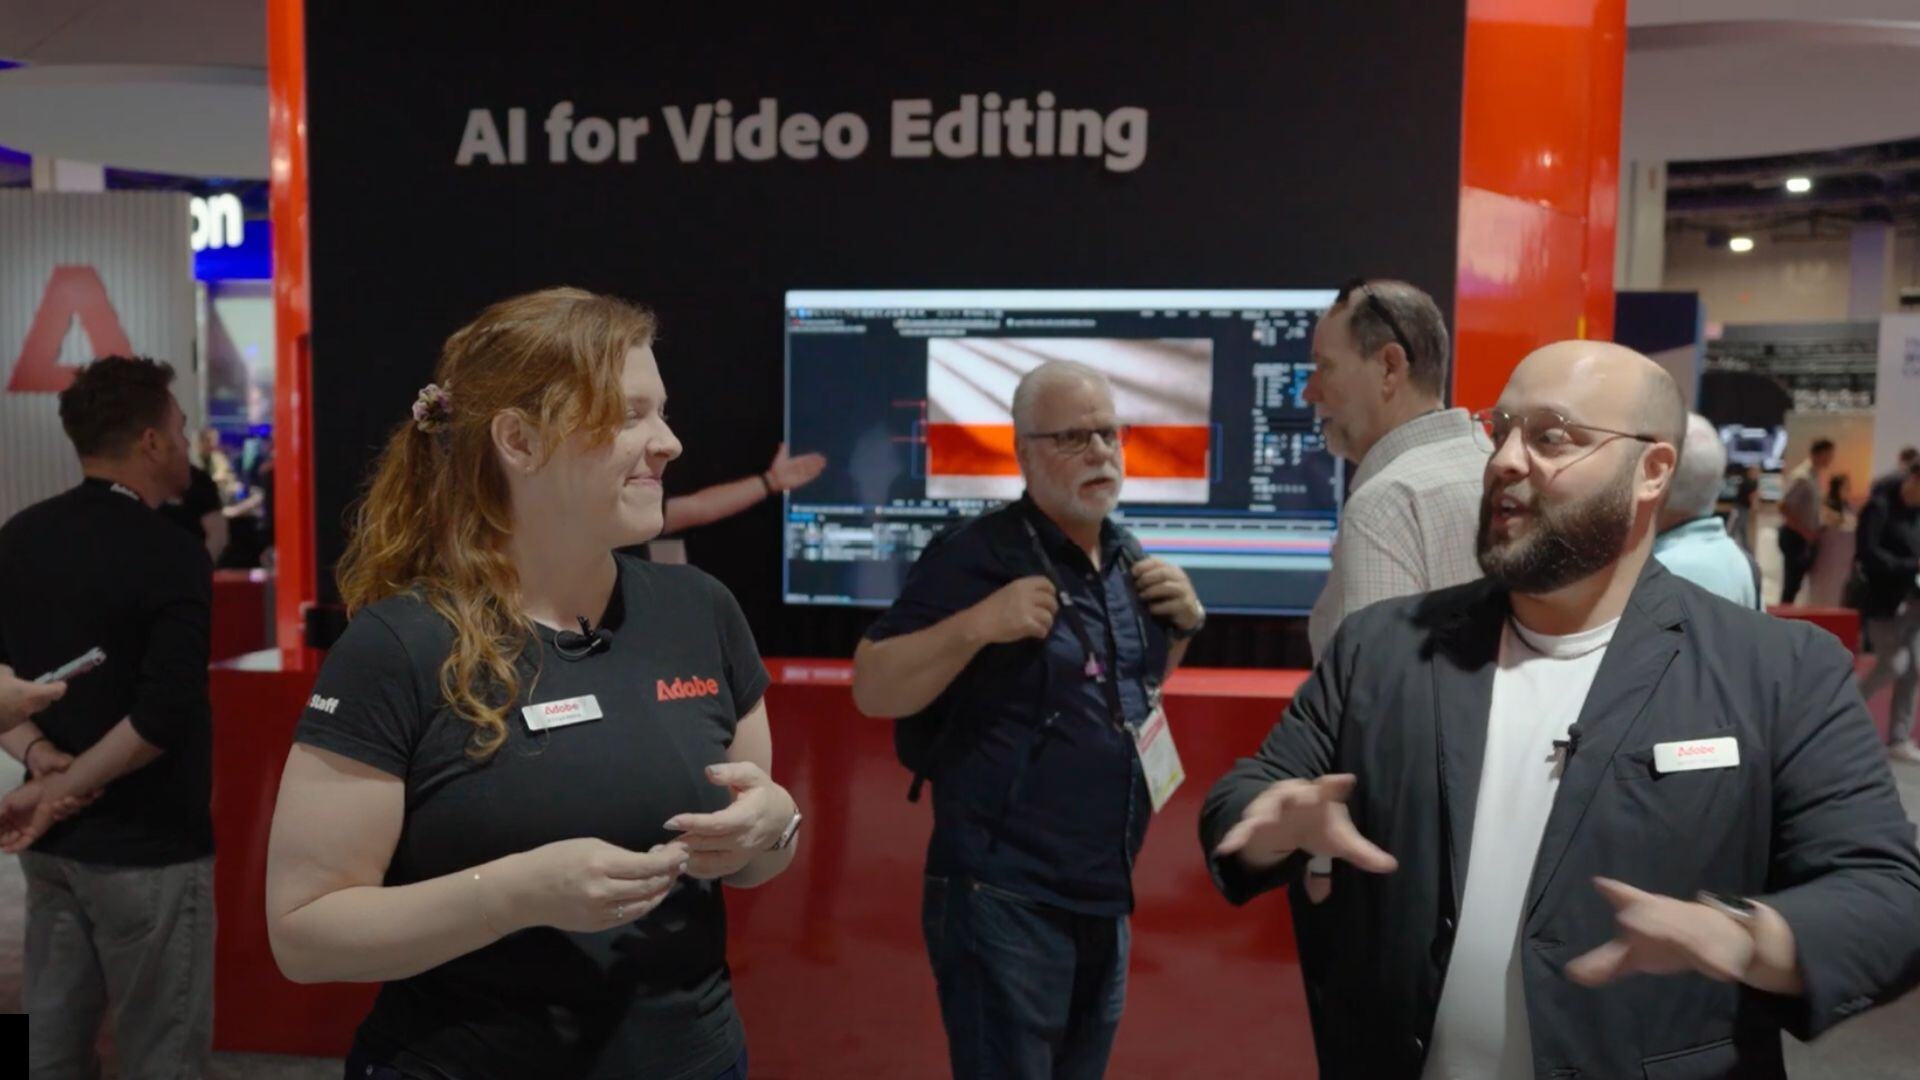 Jason and Kylee talking about the AI features in Premiere Pro